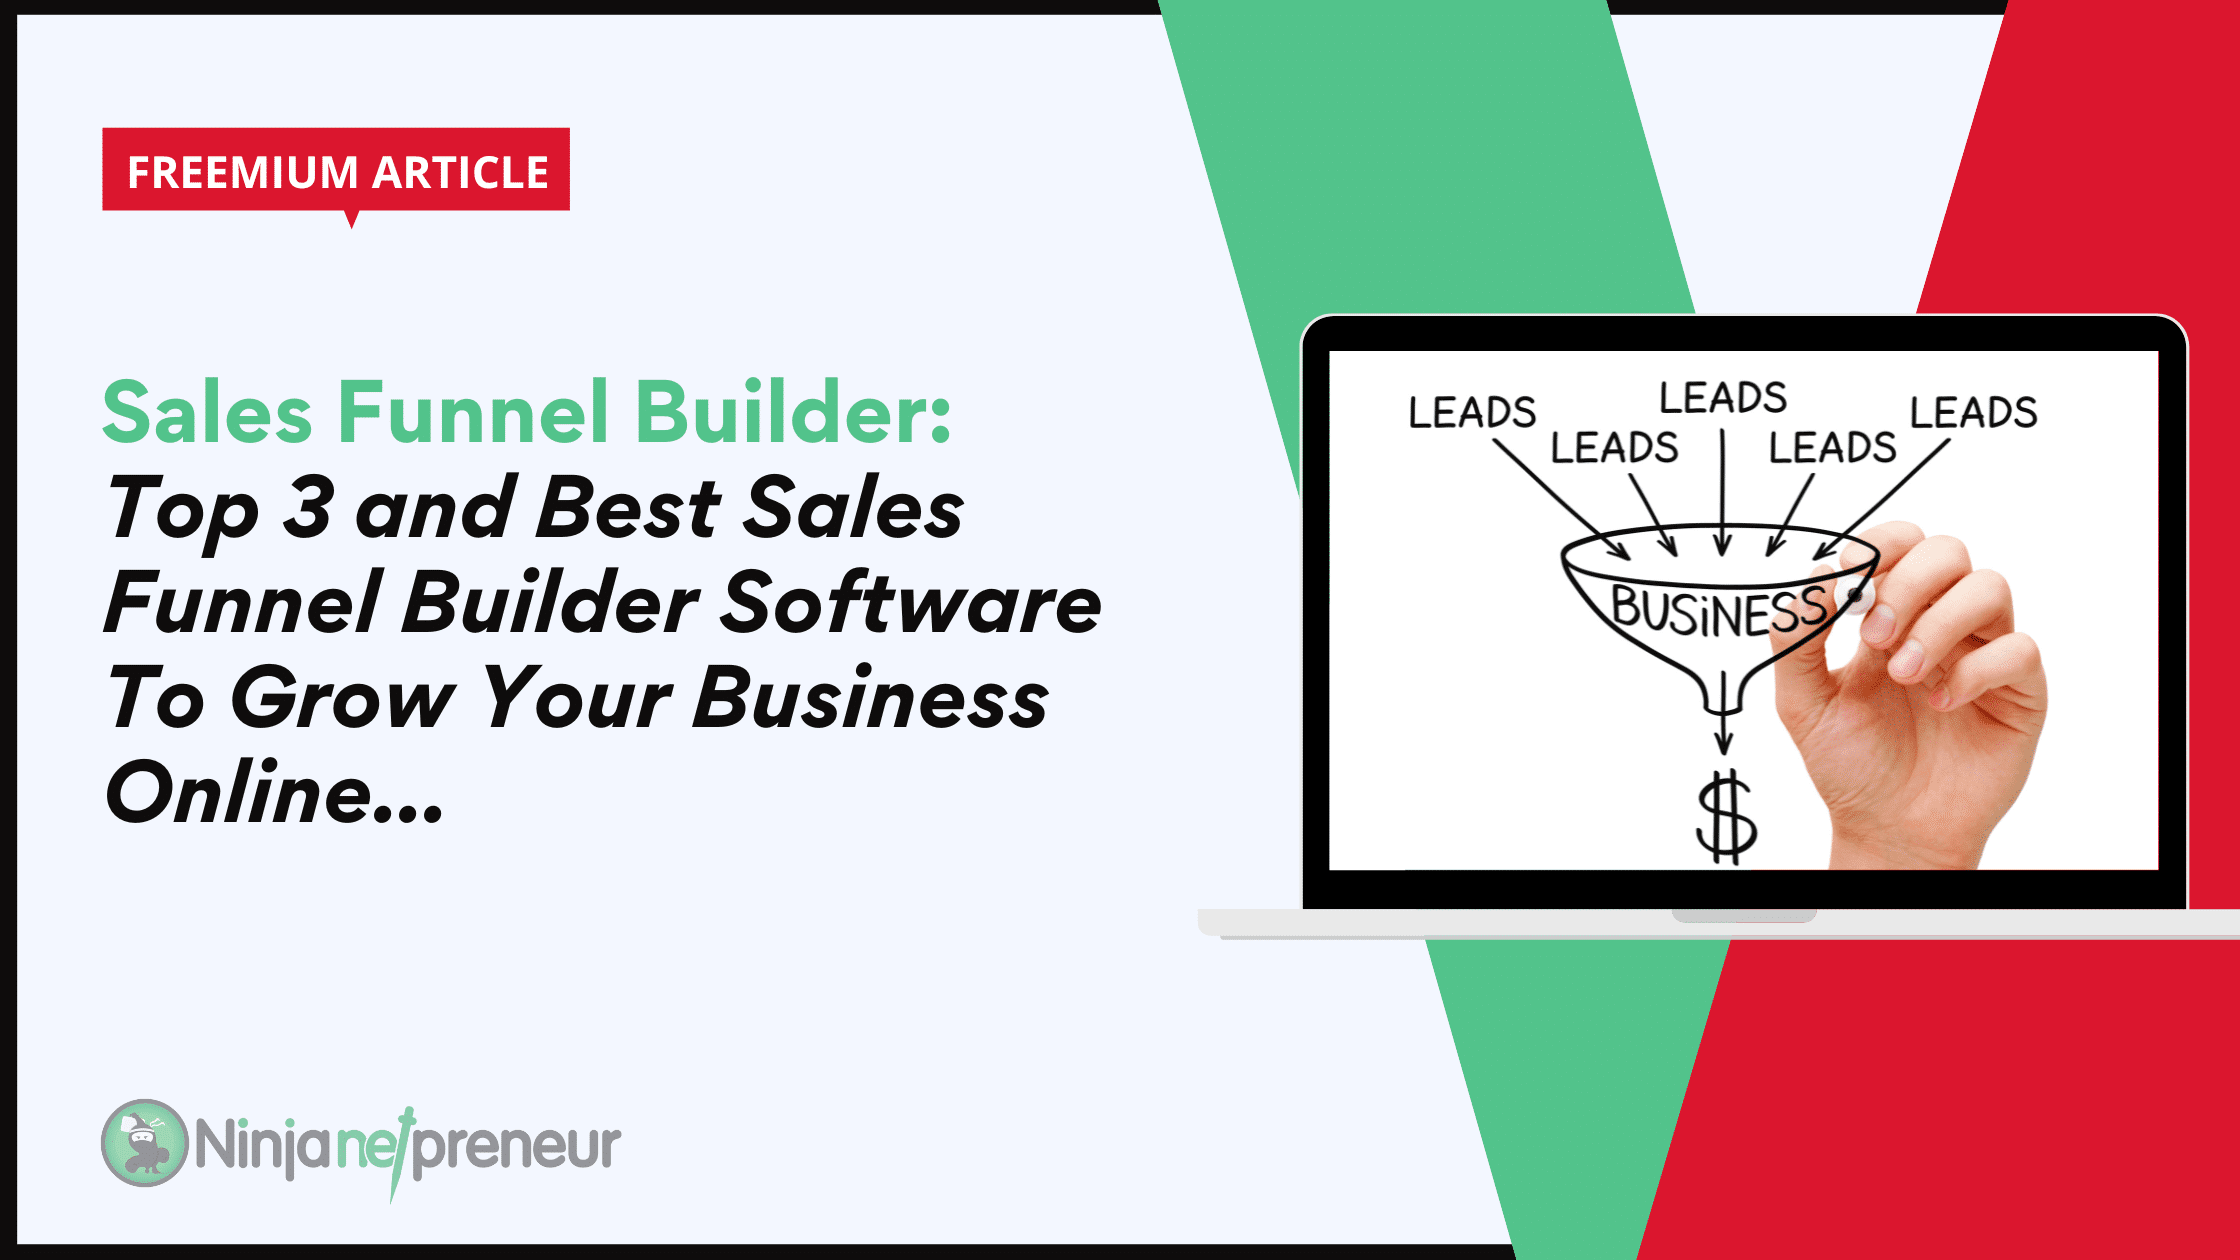 Sales Funnel Builder: Top 3 and Best Sales Funnel Builder Software to Grow Your Business Online